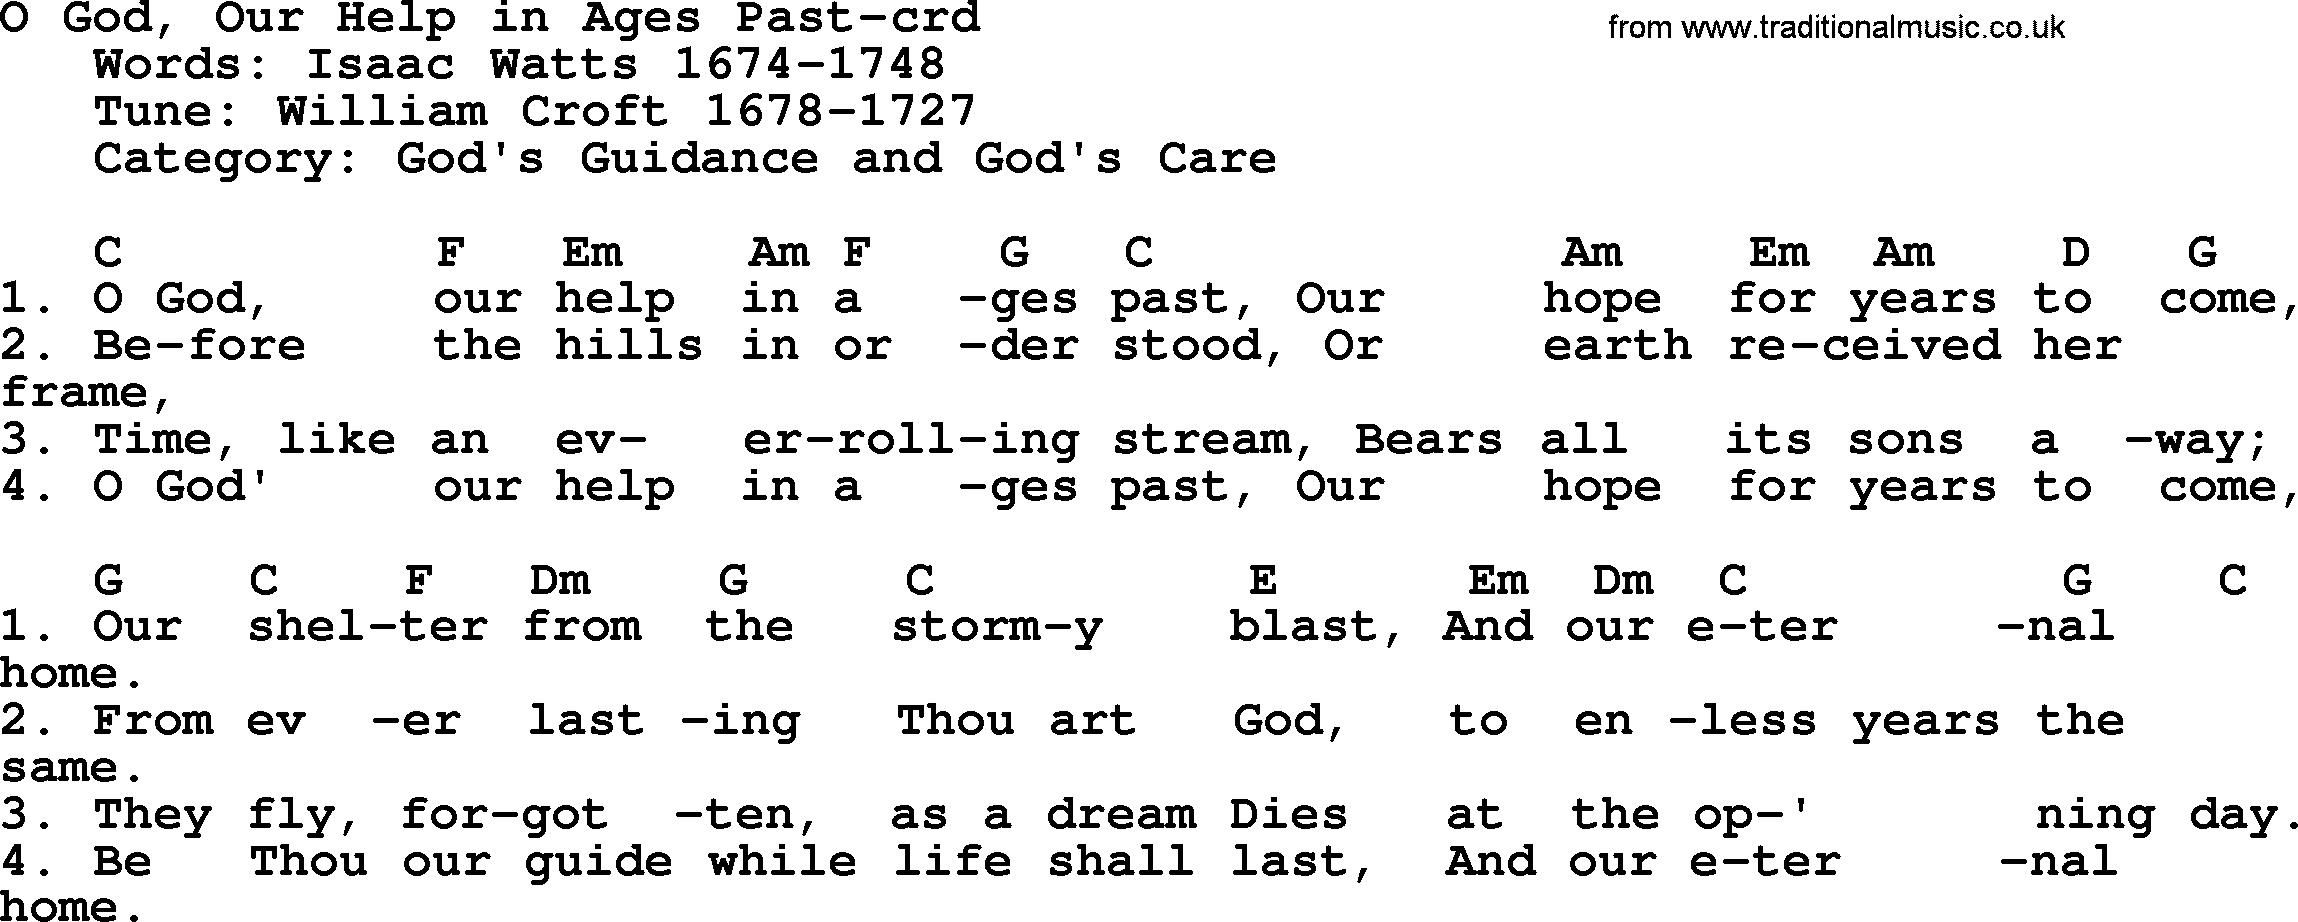 Top 500 Hymn: O God, Our Help In Ages Past, lyrics and chords